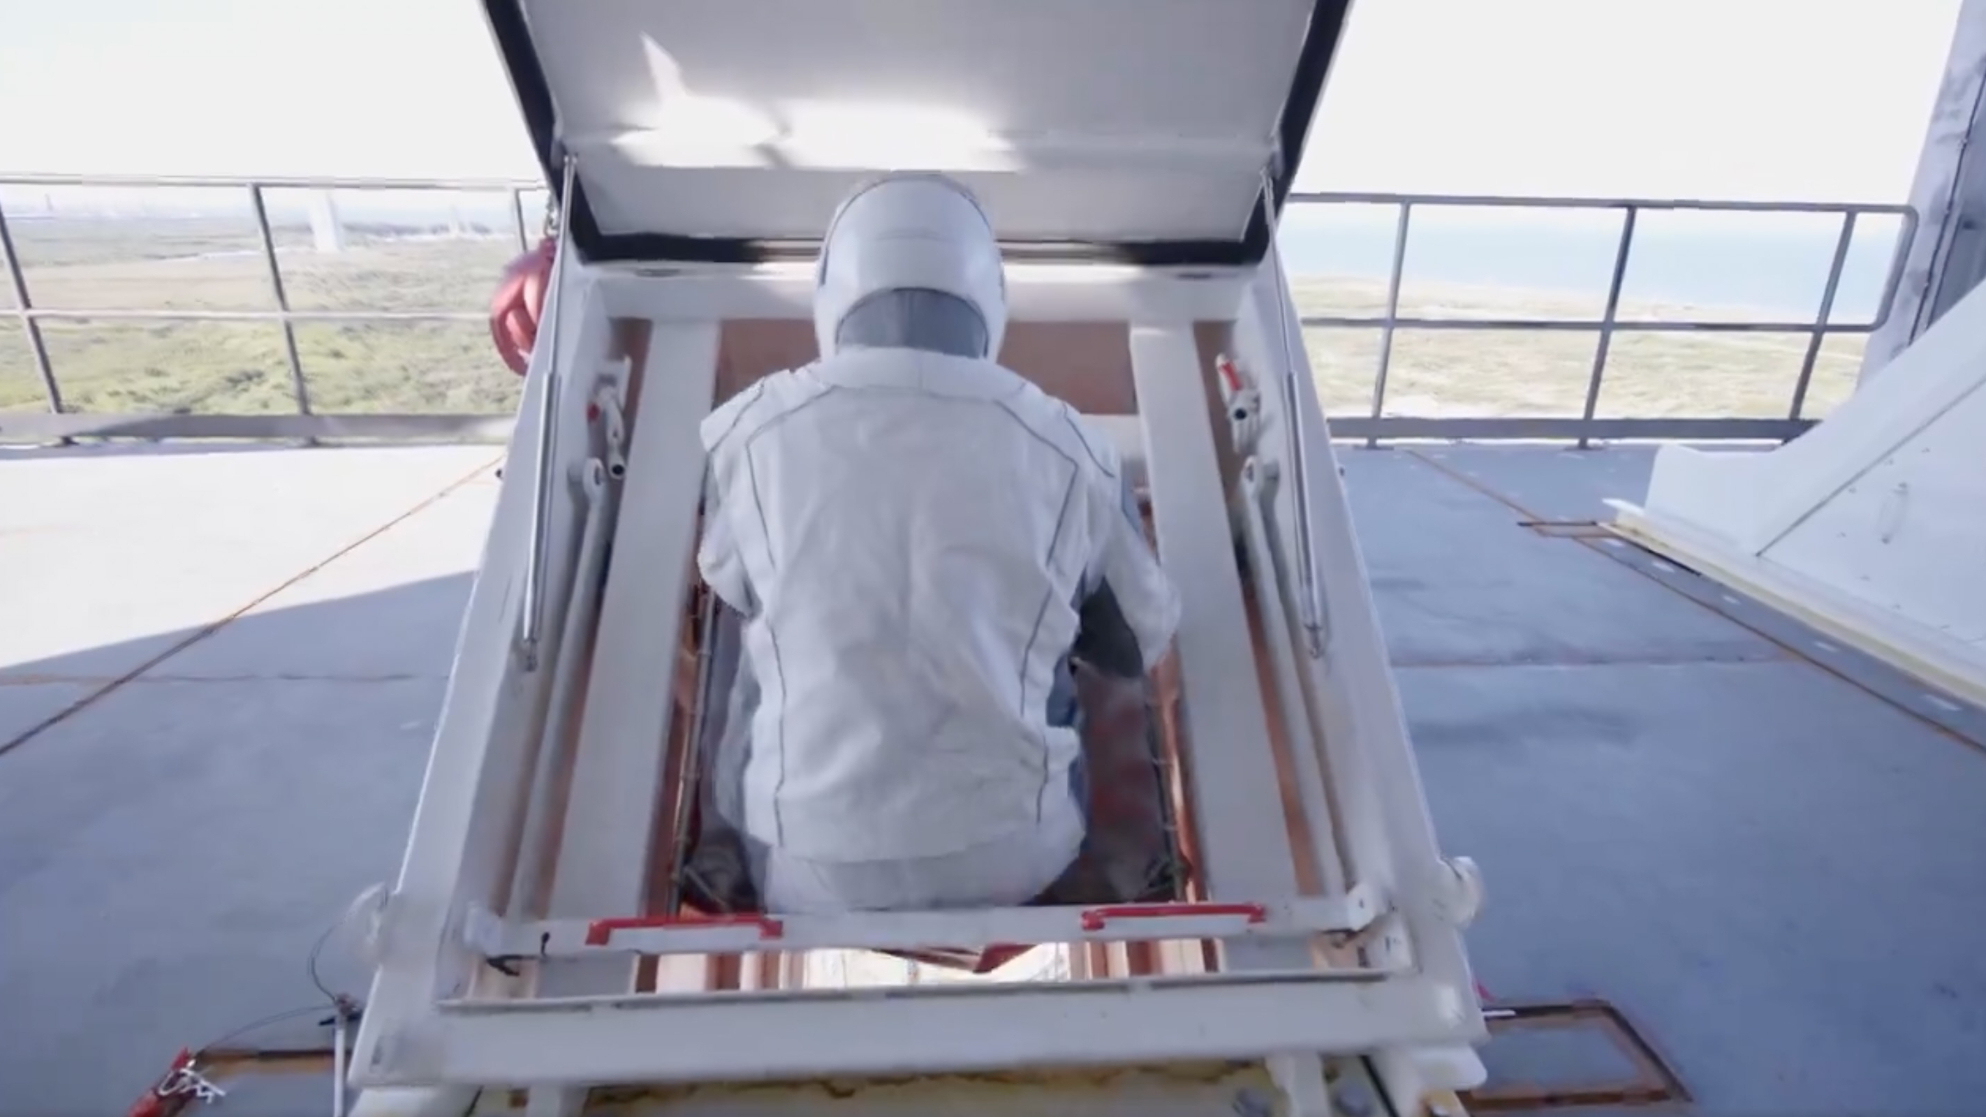 Whee! Zip down from the launch tower in SpaceX’s new emergency-escape slide (video) Space